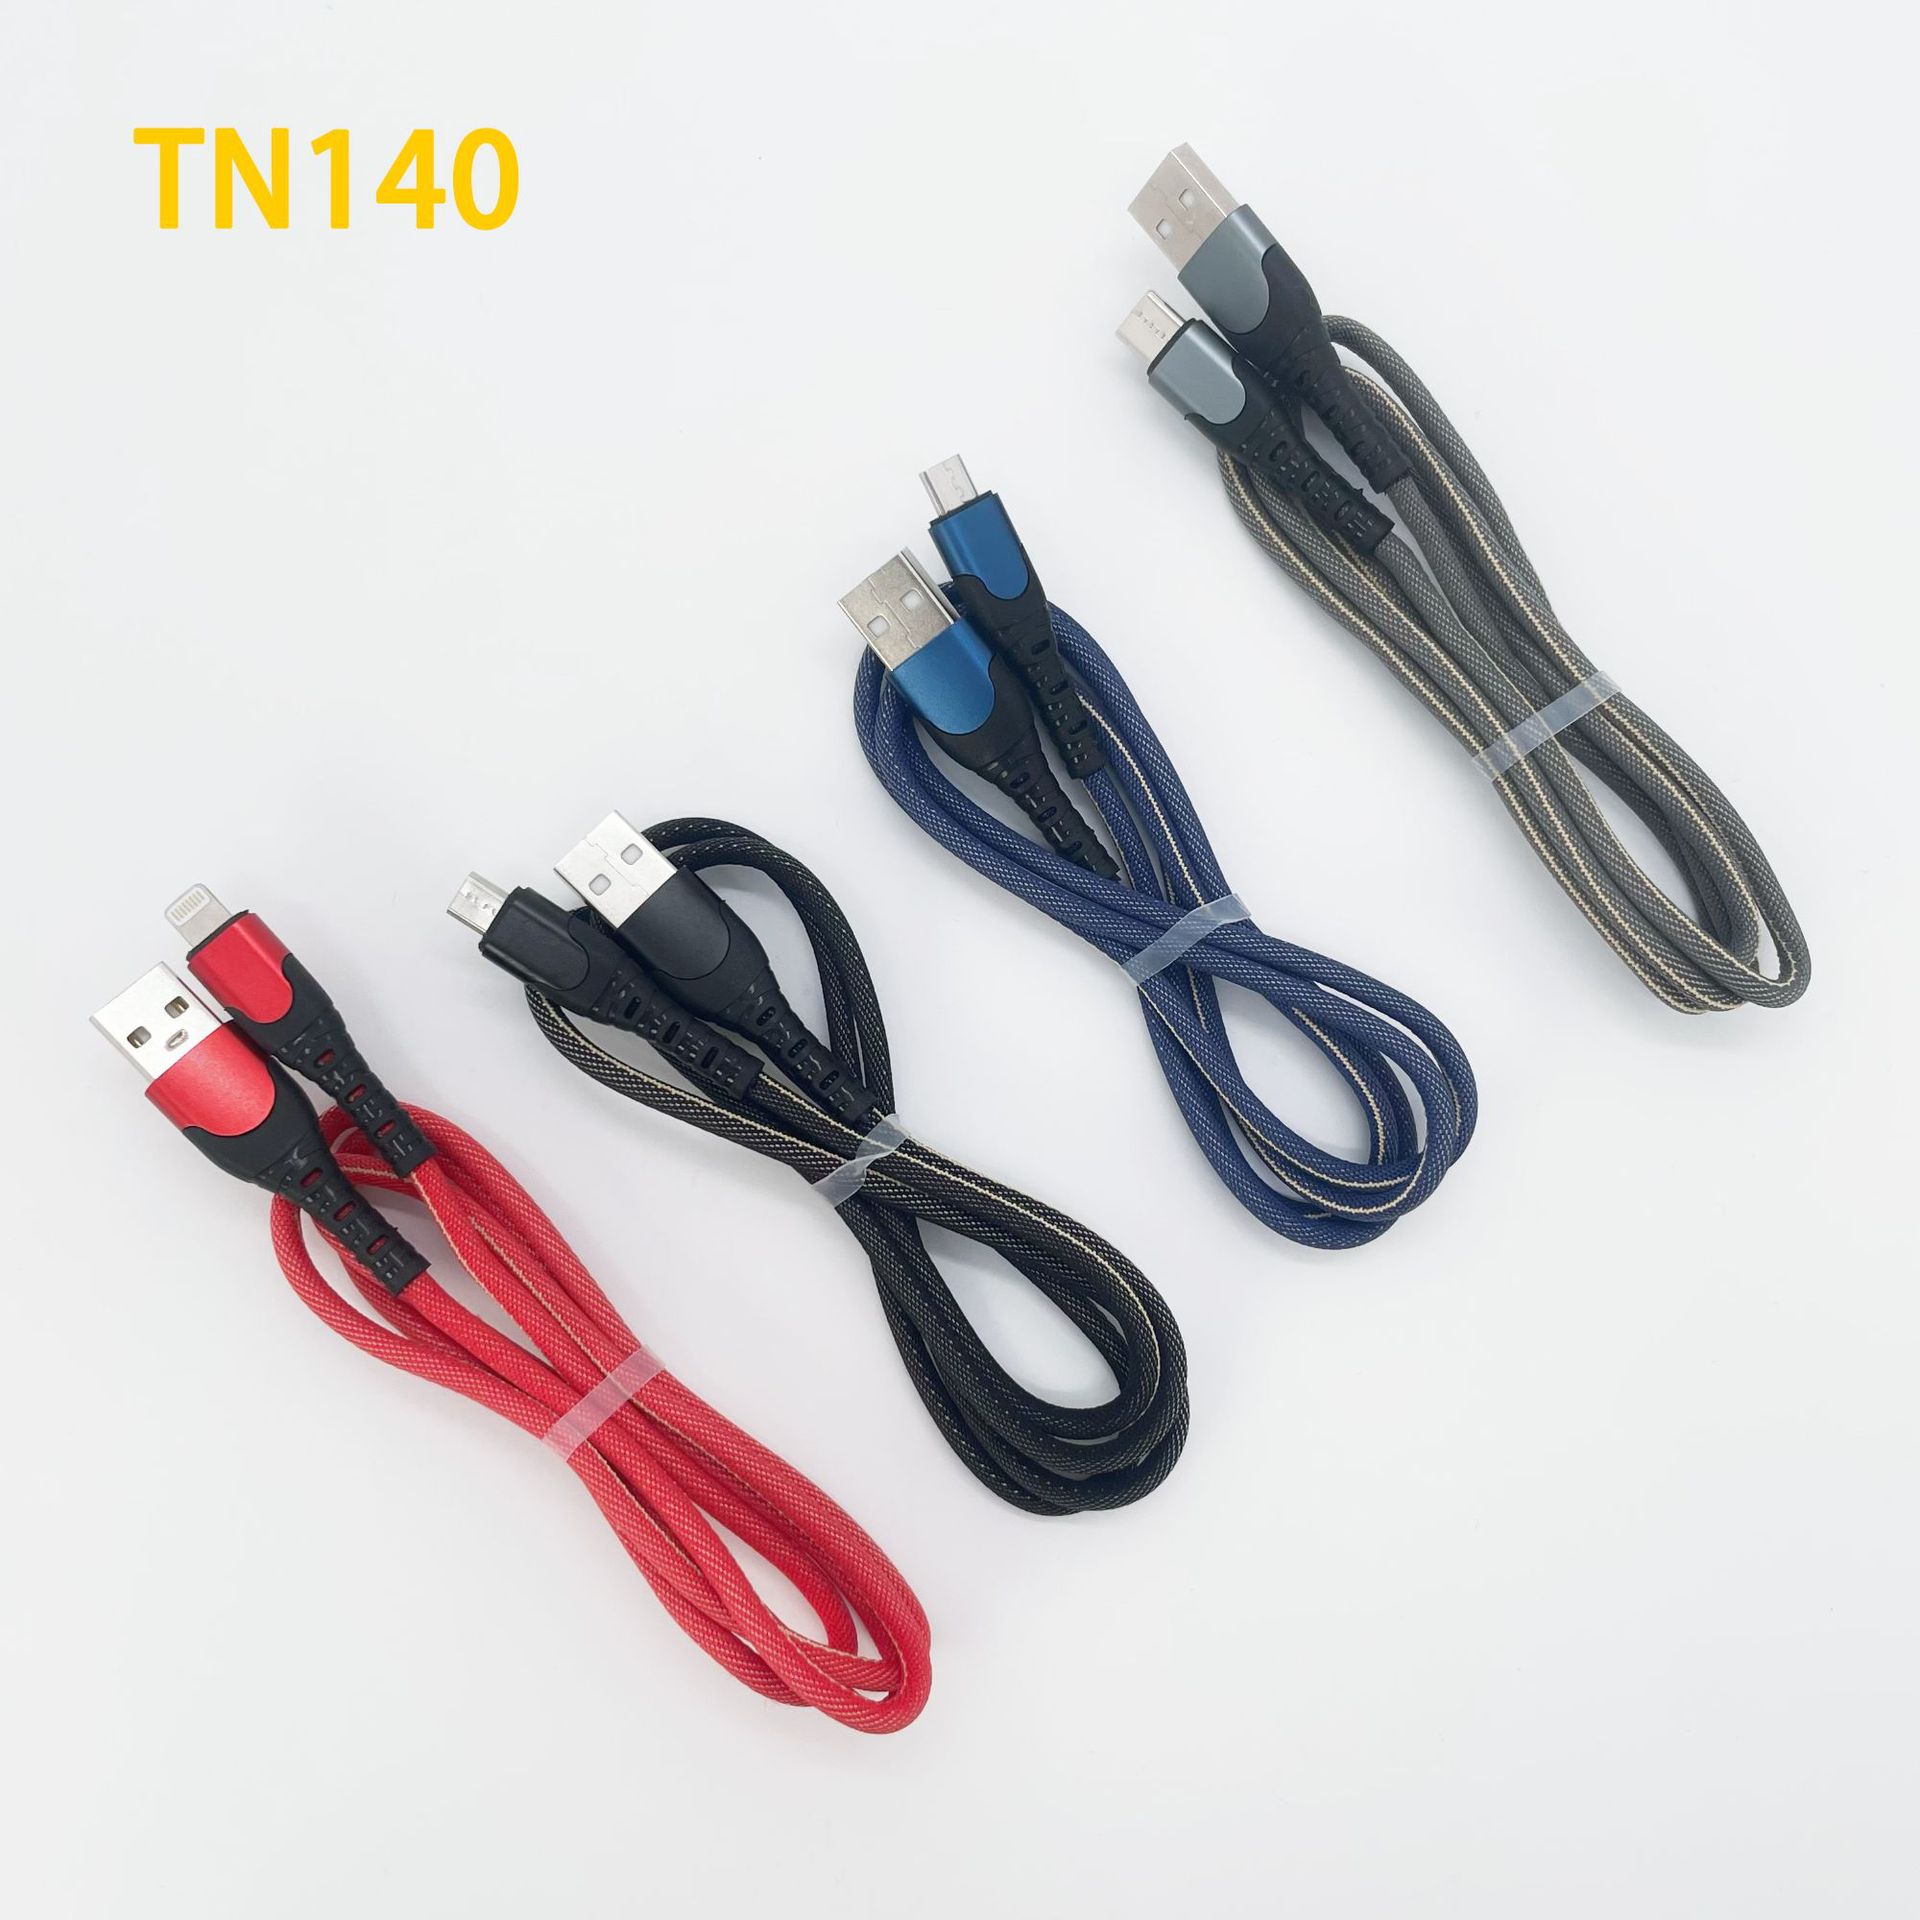 Tn140 New Woven Fast Charge Data Cable I5 Android TC Smartphone Qc3.0 Fast Charge Function Delivery Supported